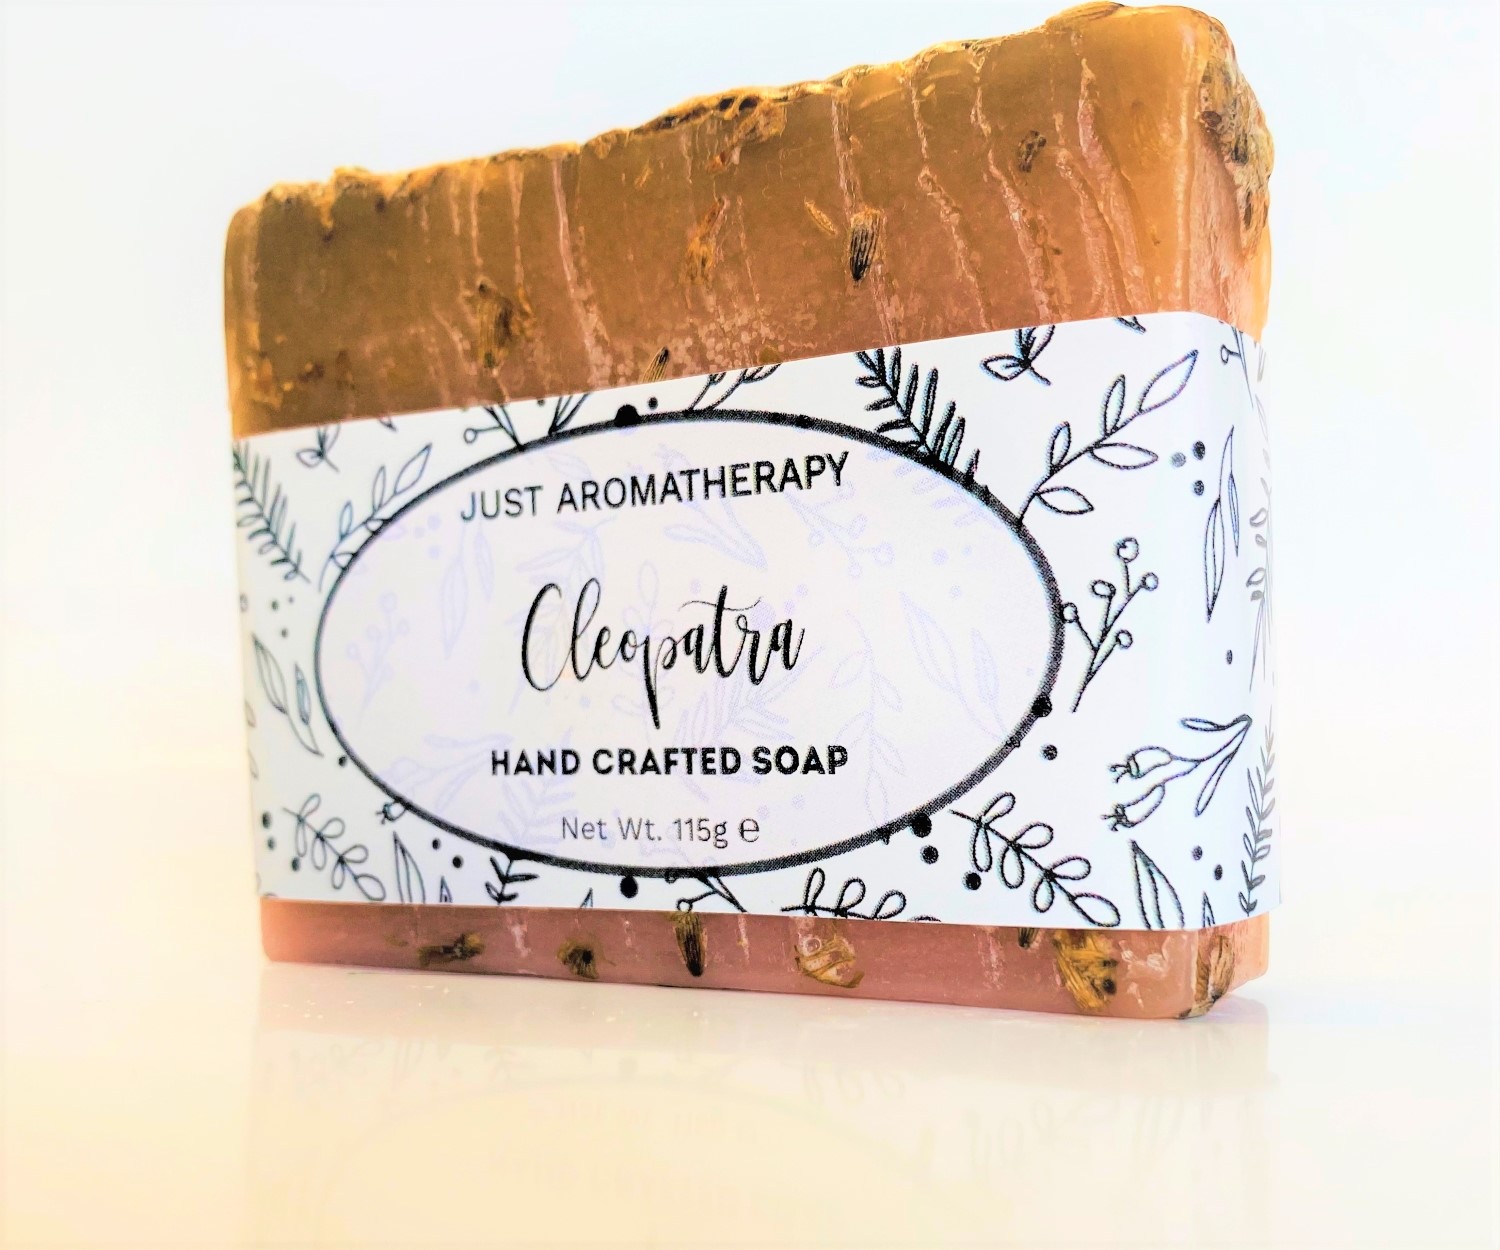 Cleopatra - Wild & Natural Hand Crafted Soap